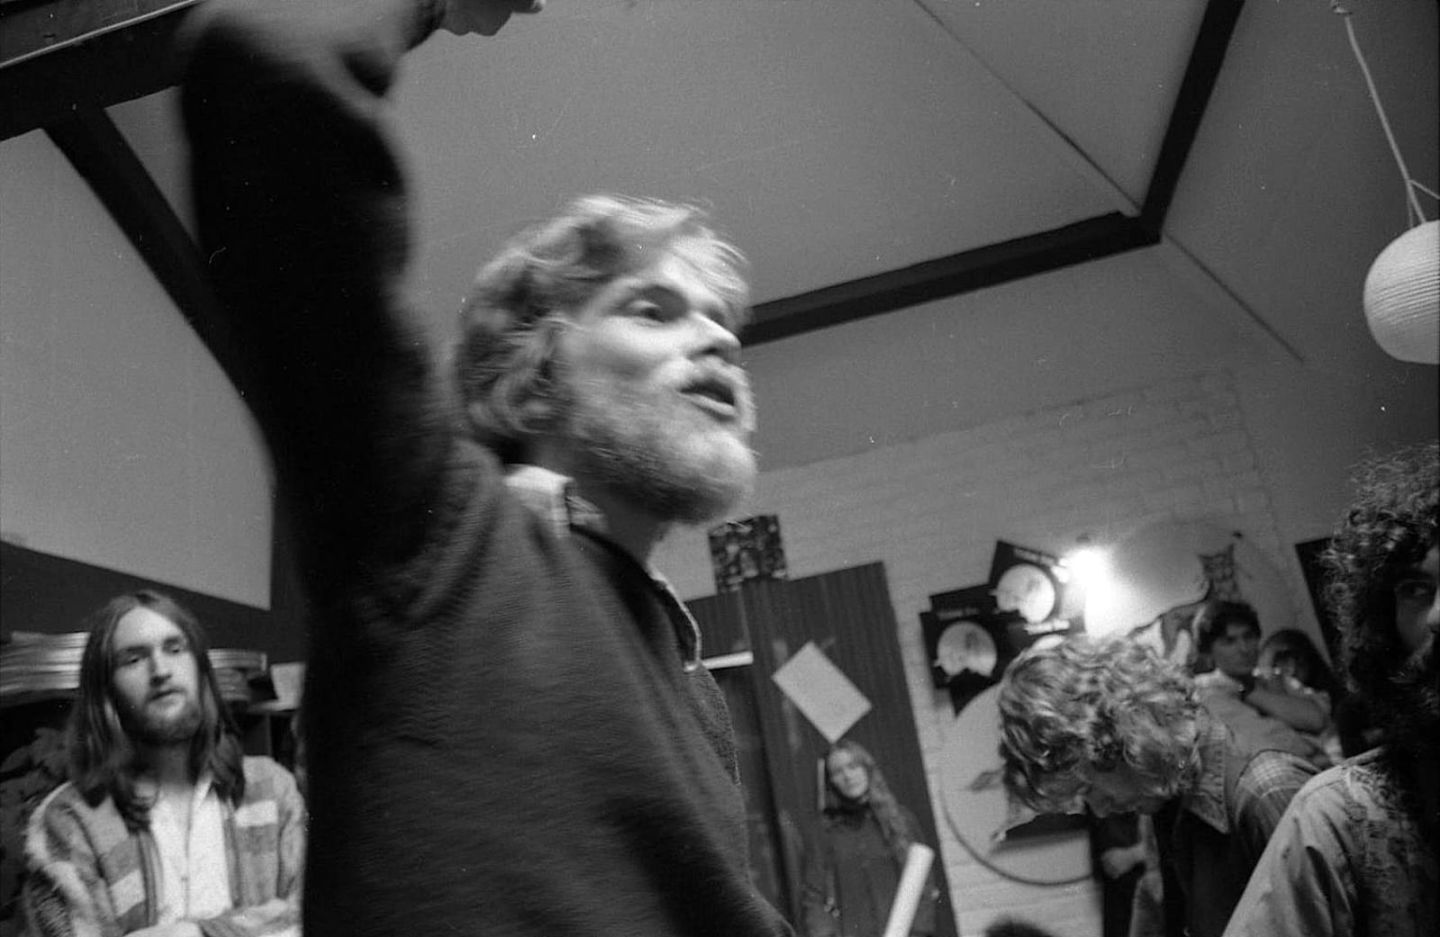 A young, bearded Richard Branson in the studio with his arm raised